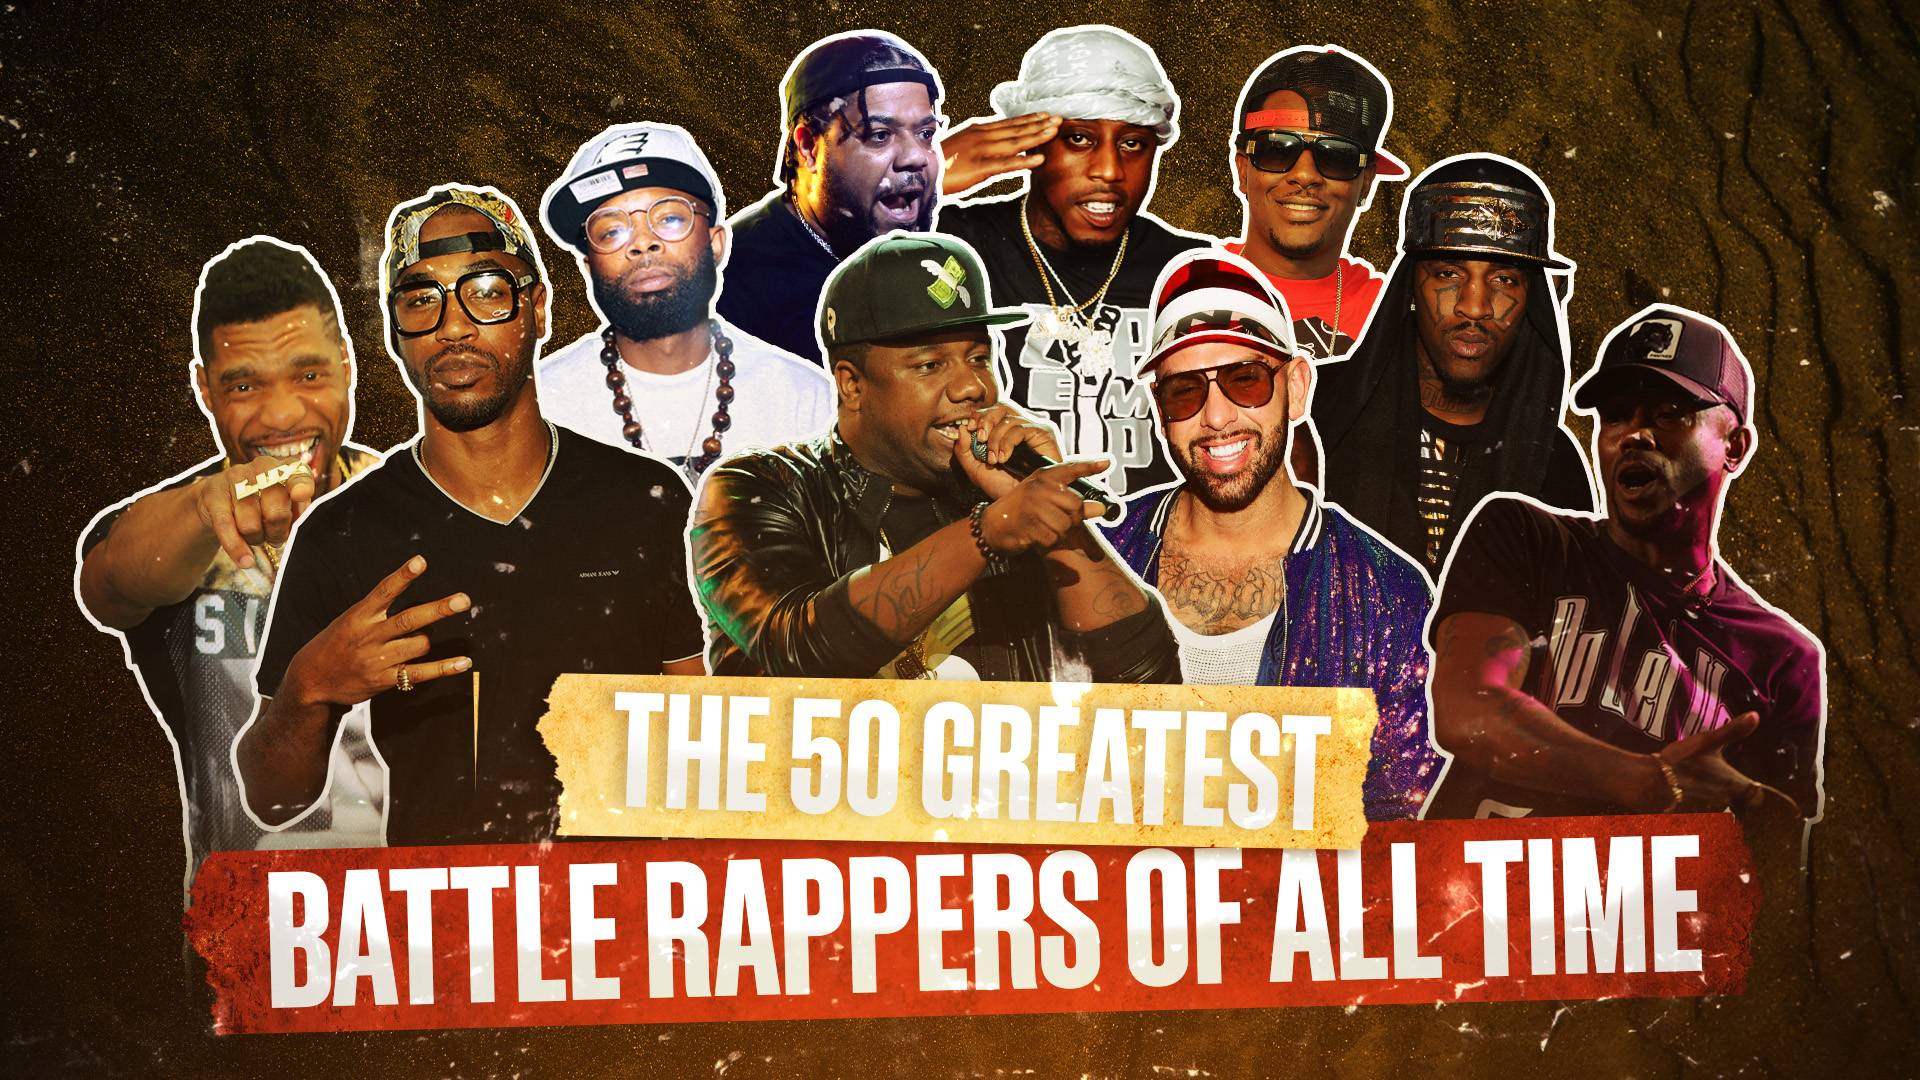 10132022-50-greatest-battle-rappers-of-all-time-listicle